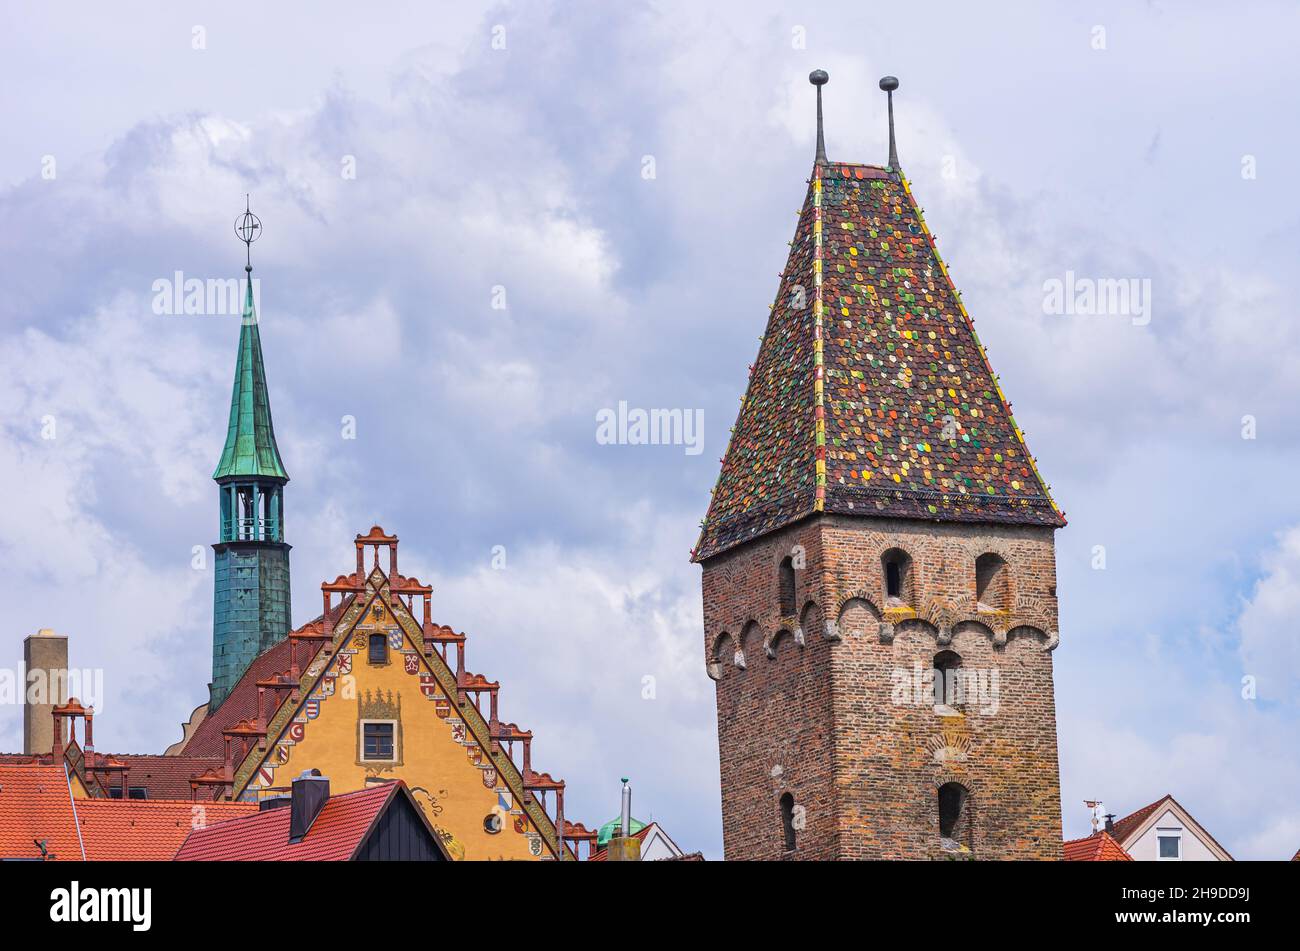 Ulm, Baden-Württemberg, Germany: The Metzgerturm tower, also known as the Leaning Tower of Ulm, a surviving gate of the medieval city fortifications. Stock Photo